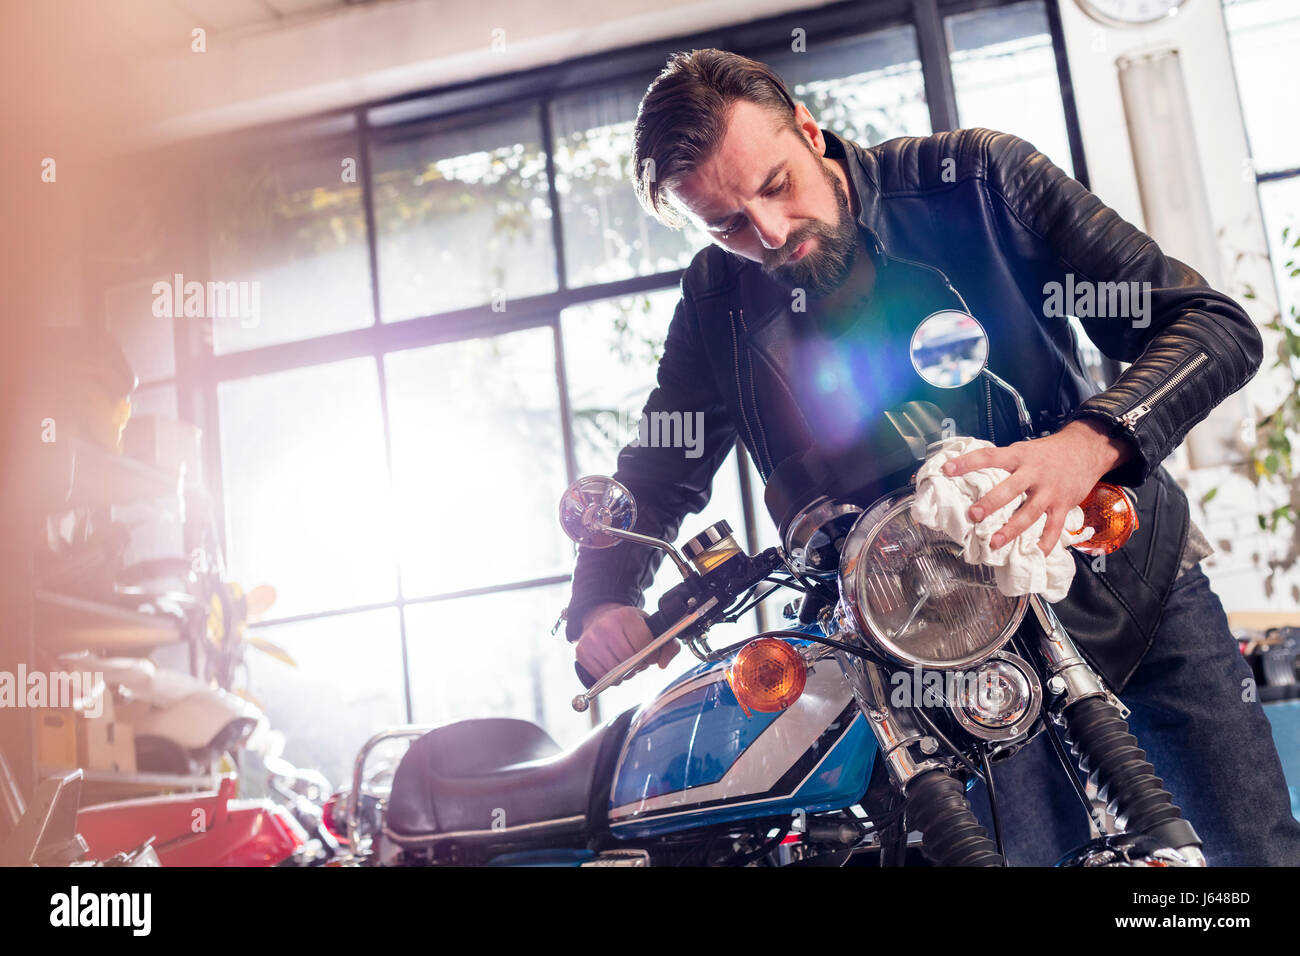 Male motorcycle mechanic wiping motorcycle in workshop Stock Photo